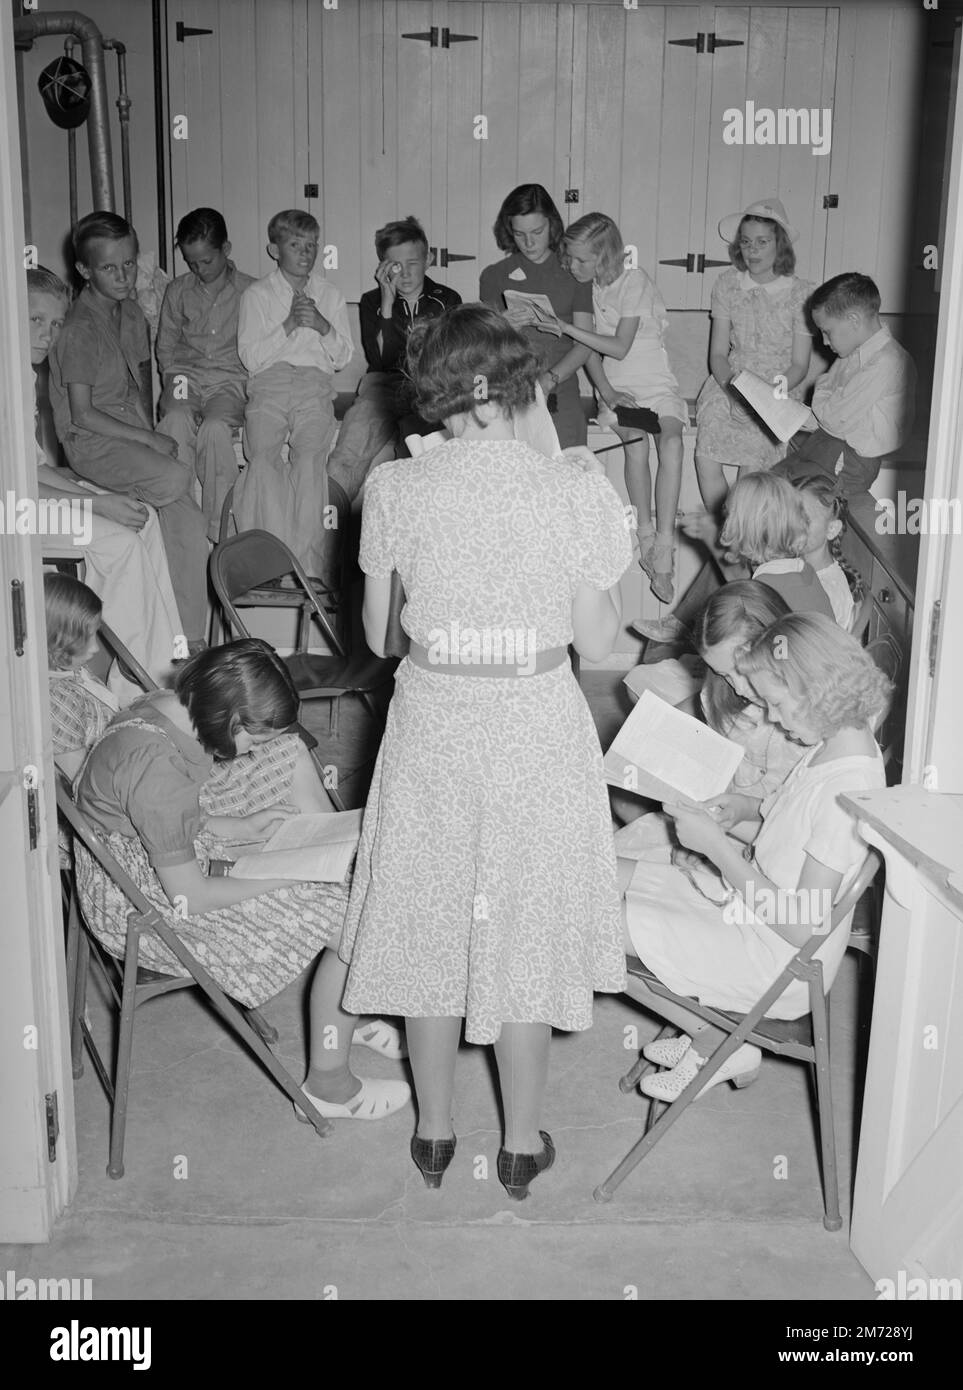 Sunday school lesson at the community house of the Casa Grande Valley Farms. Pinal County, Arizona, historic photo. Lee, Russell, photographer. Circa 1940. Stock Photo